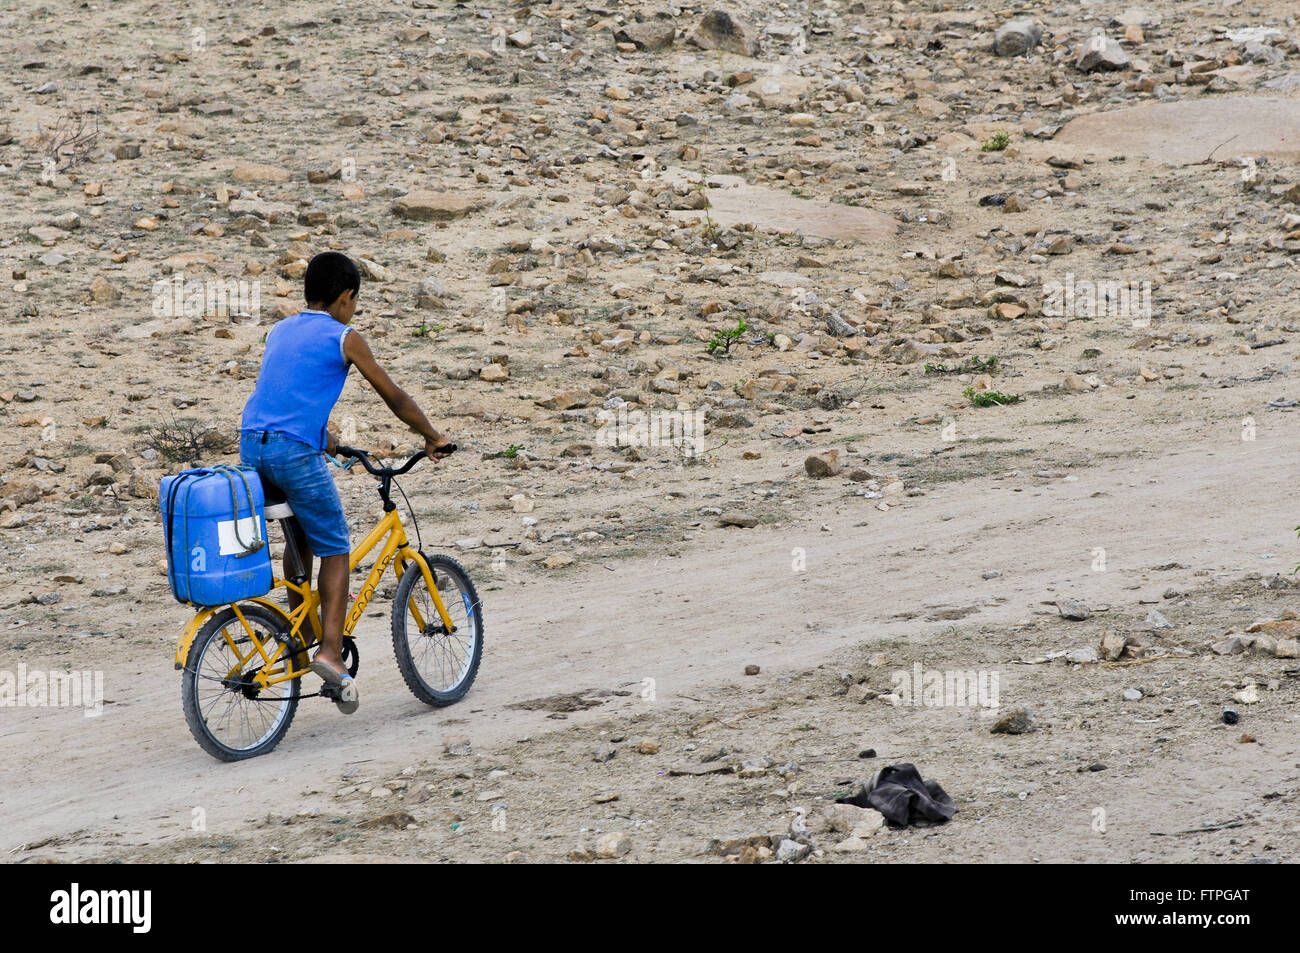 Boy Loading gallon with water cycling in rural populated Mulungu Stock Photo